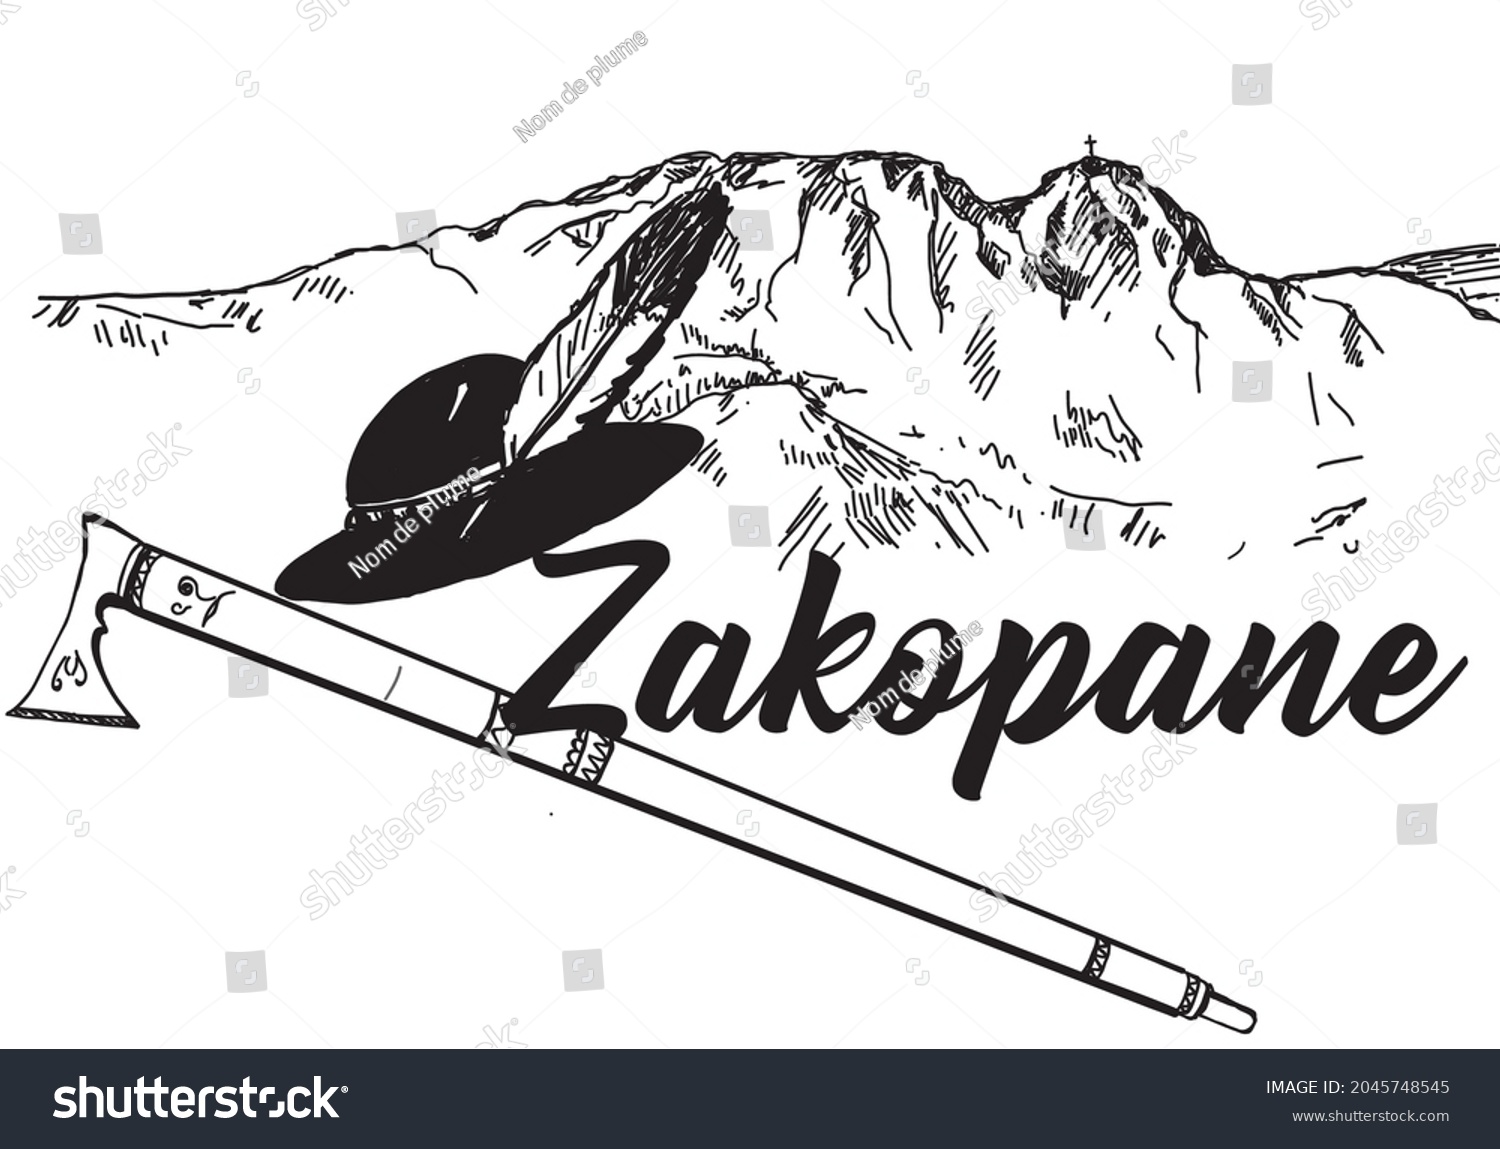 SVG of Black and white hand drawing showing the inscription Zakopane and the mountains, a highlander ciupaga and a hat. svg